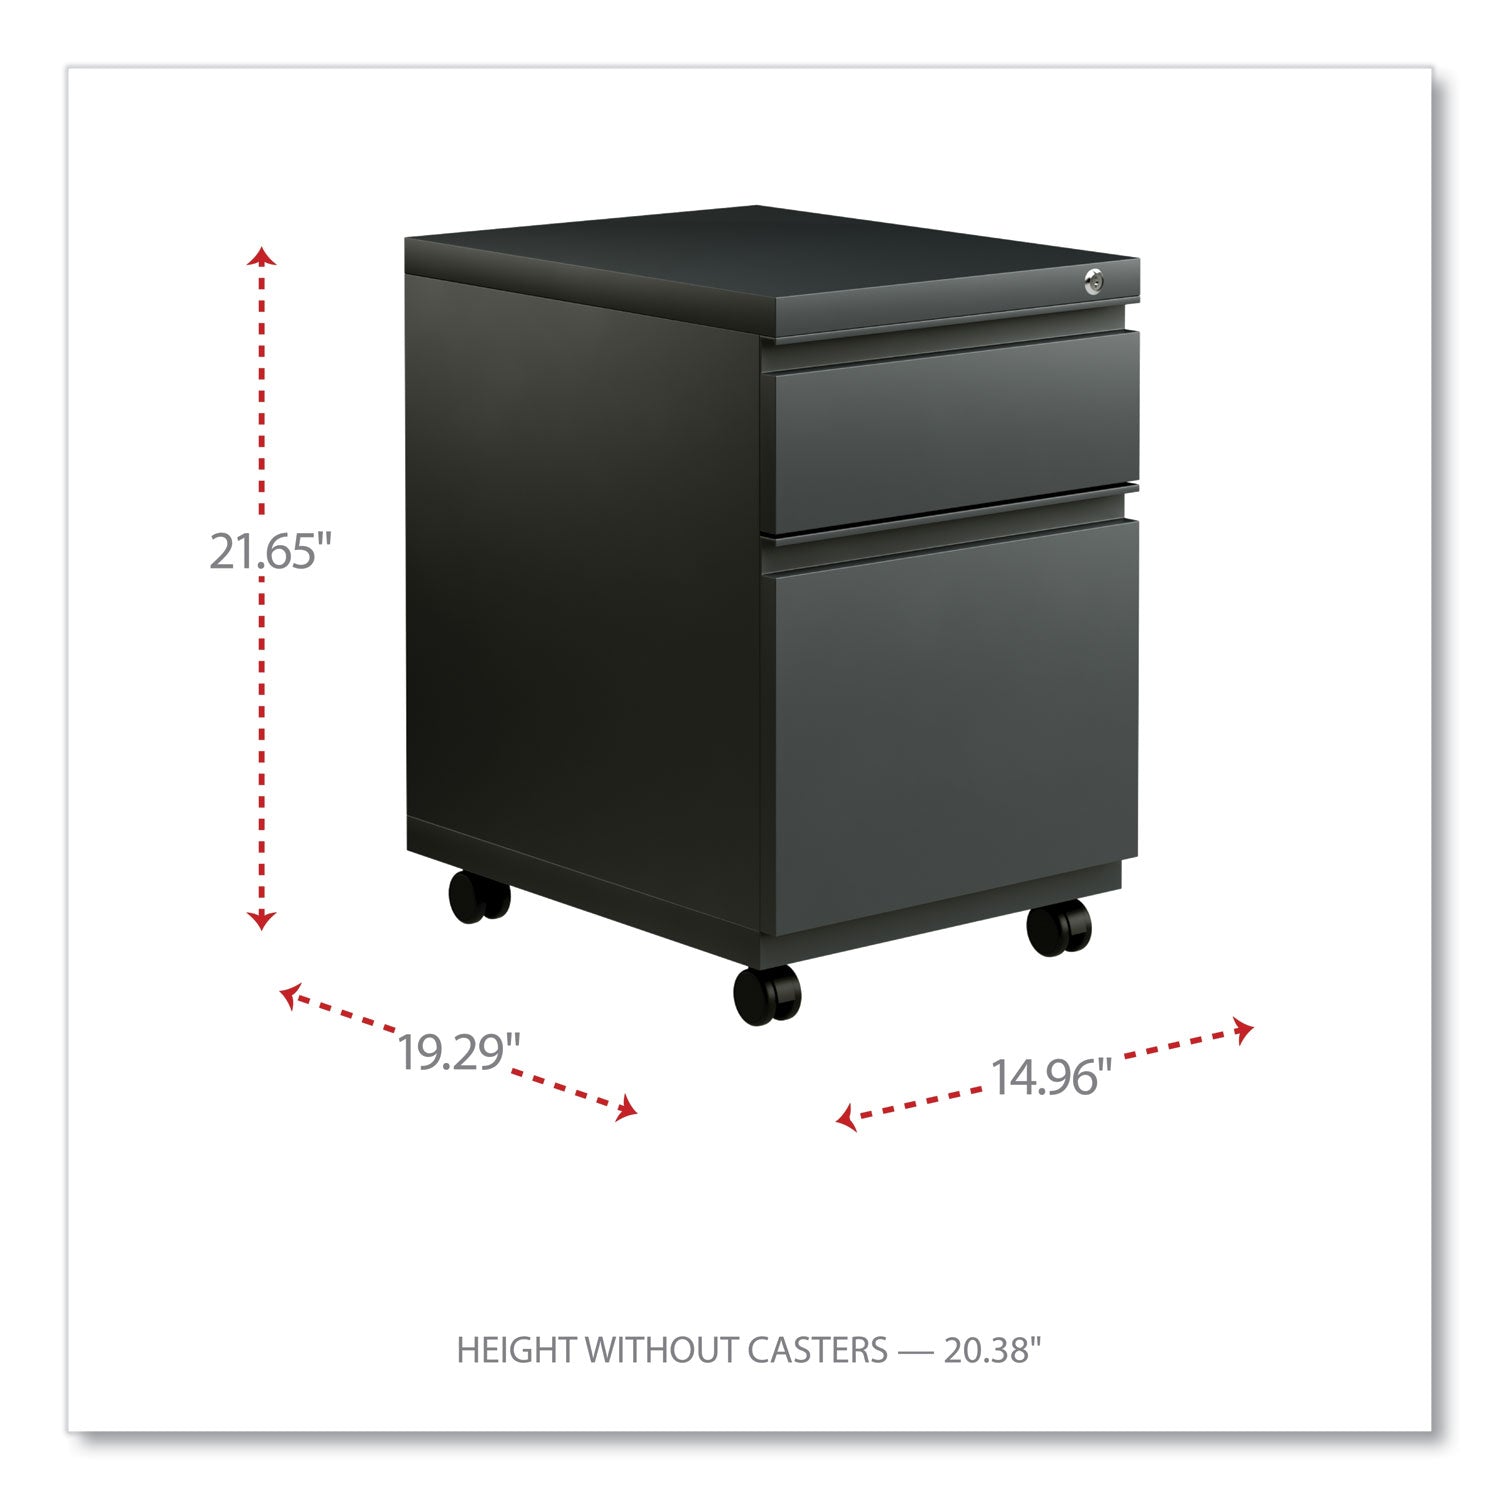 file-pedestal-with-full-length-pull-left-or-right-2-drawers-box-file-legal-letter-charcoal-1496-x-1929-x-2165_alepbbfch - 2